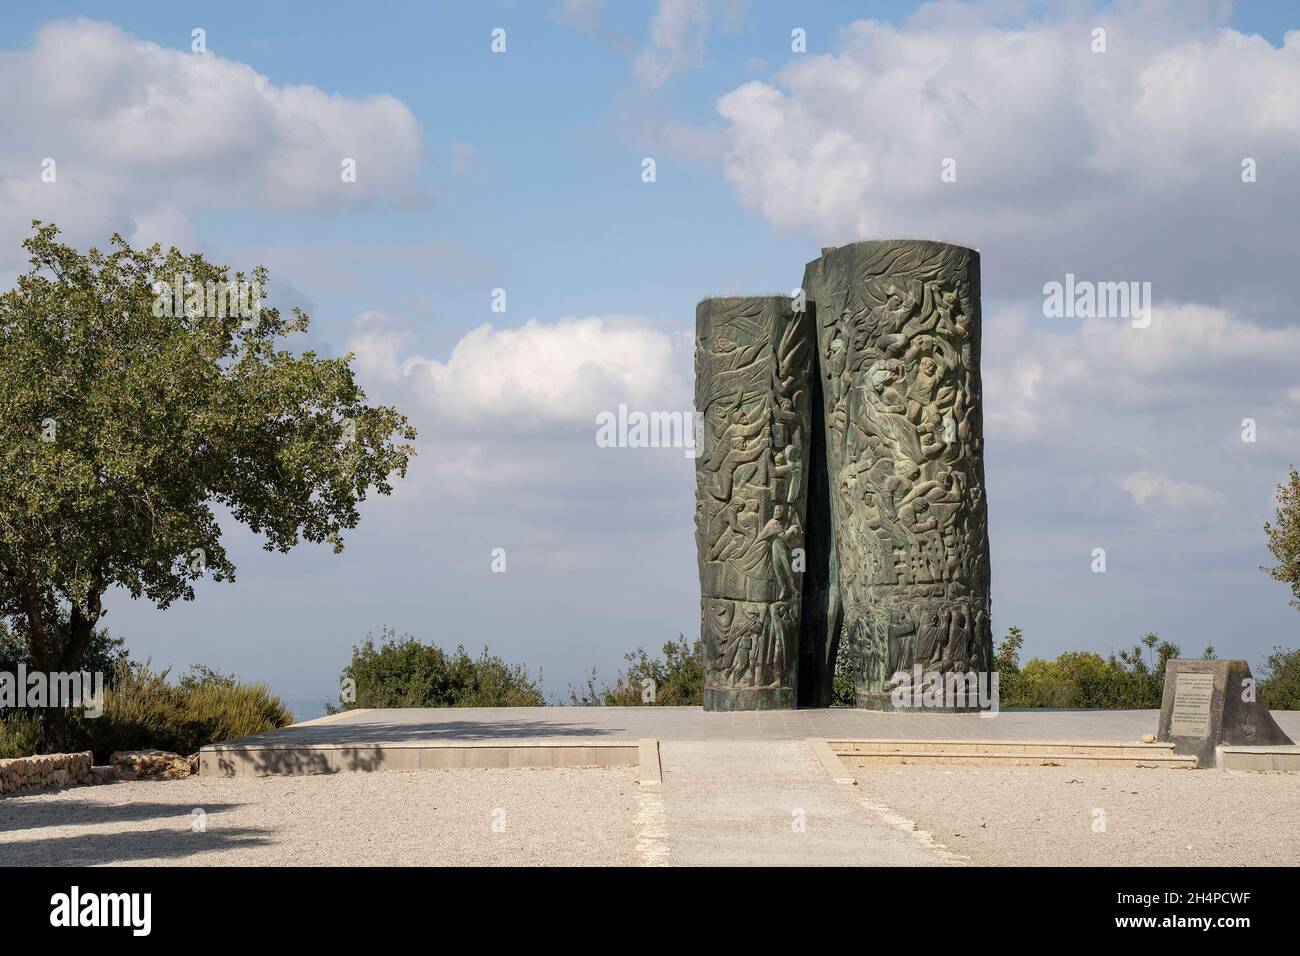 Judea mountains, Israel - October 10th, 2021: The ' Scroll of Fire ' bronze holocaust memorial, in the Judea mountains, near Jerusalem, Israel. Stock Photo